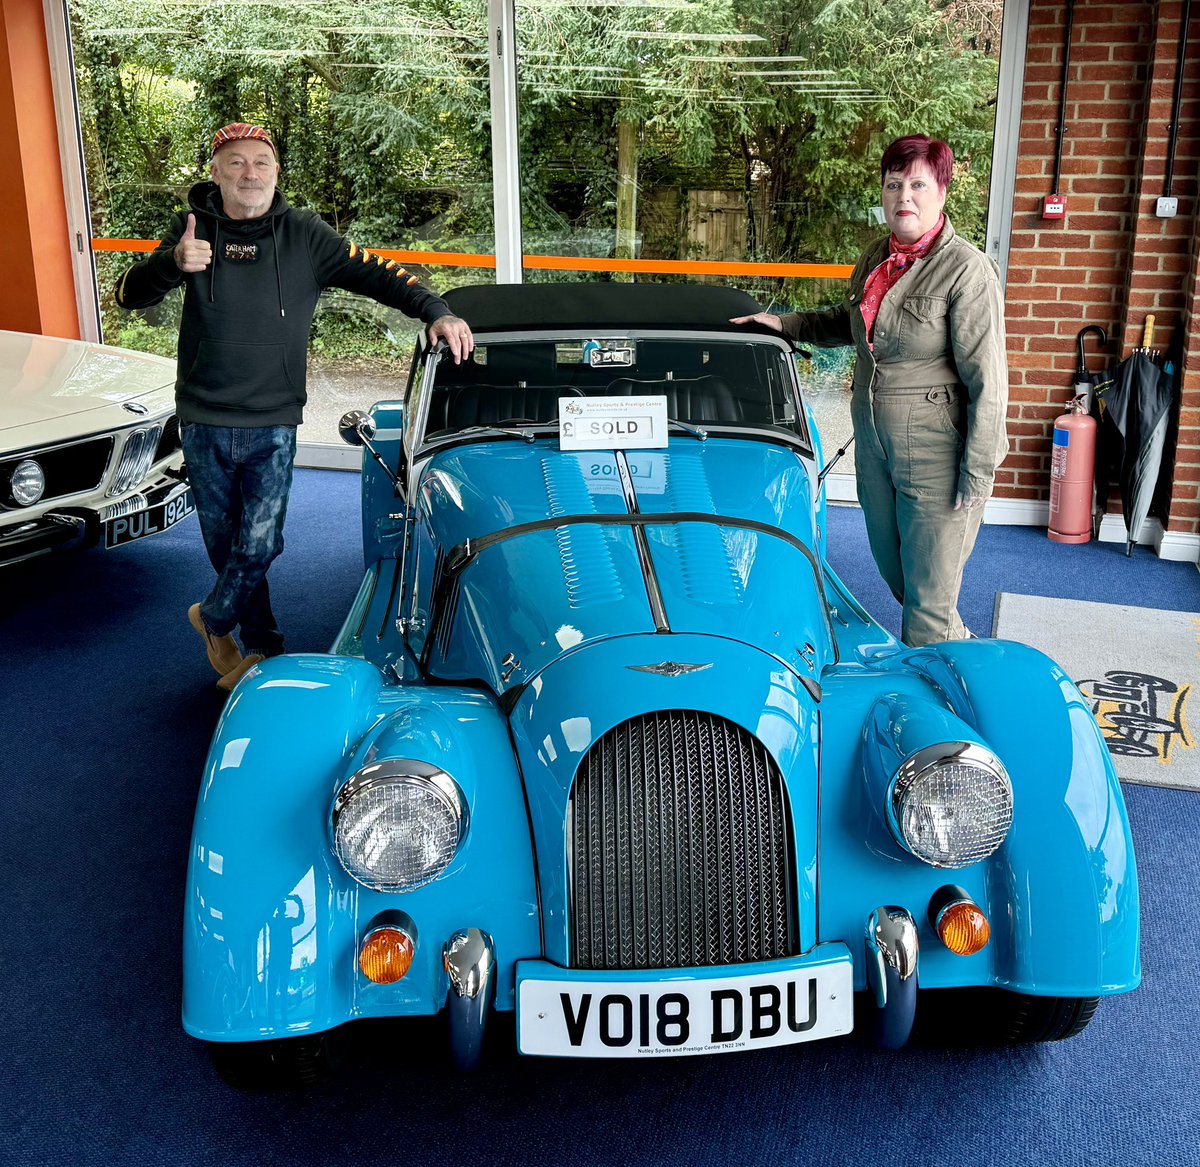 Winter Blues...Never ! This is Miami Blue 💙

Thank you for your business Kim & Elaine and welcome to Morgan motoring.

#sold #morganmotorcompany #morgancars #morganplus4 #porschemiamiblue #morganadventure #handbuilt #madeinbritain #britishclassic #nutleysportsprestige